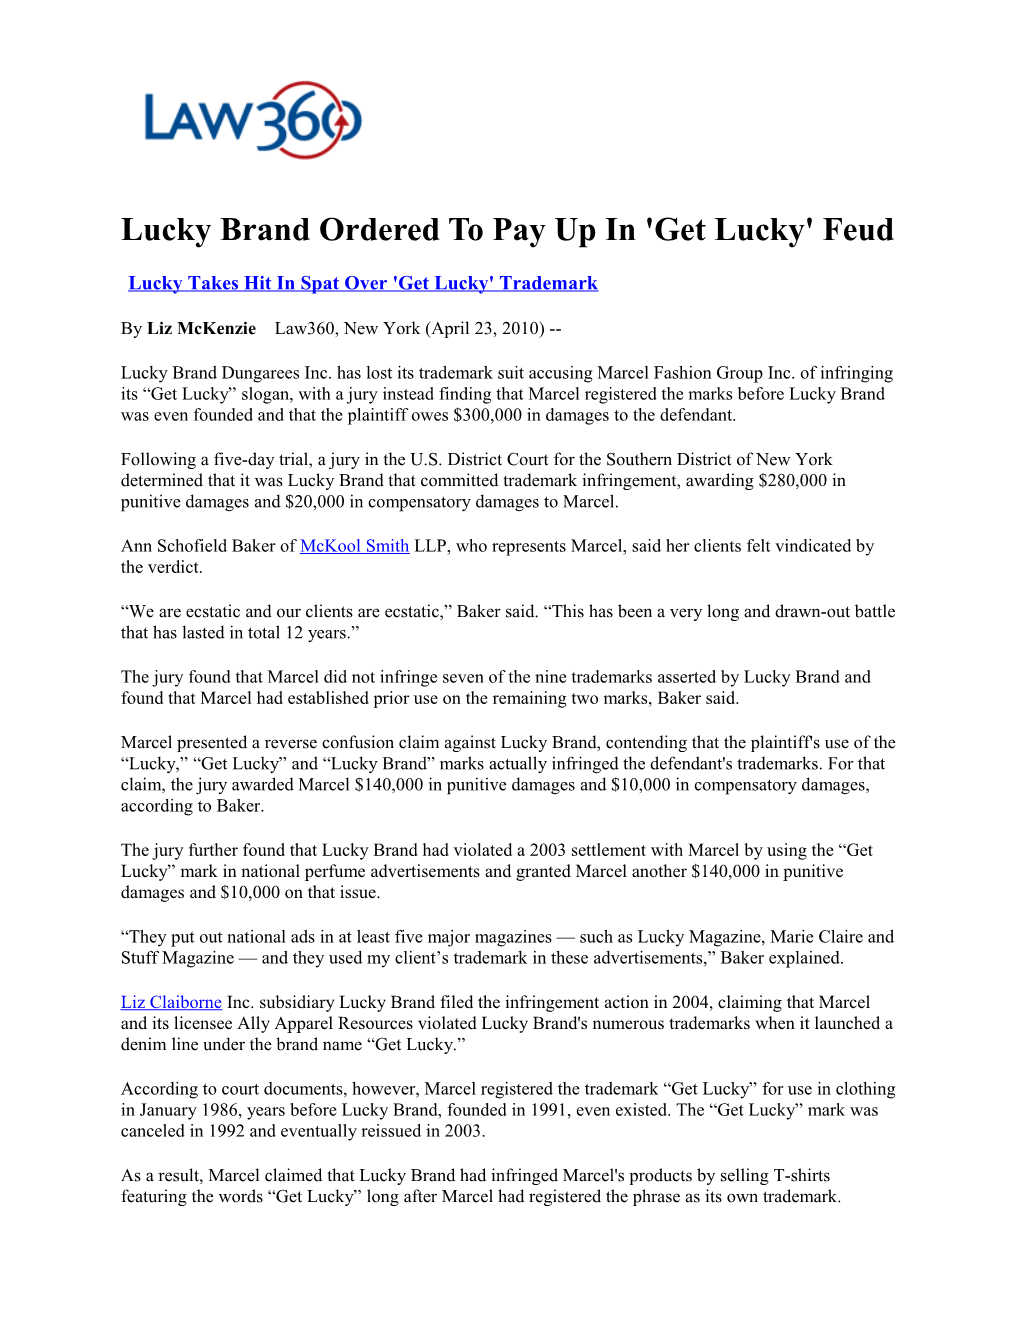 Lucky Brand Ordered to Pay up in 'Get Lucky' Feud